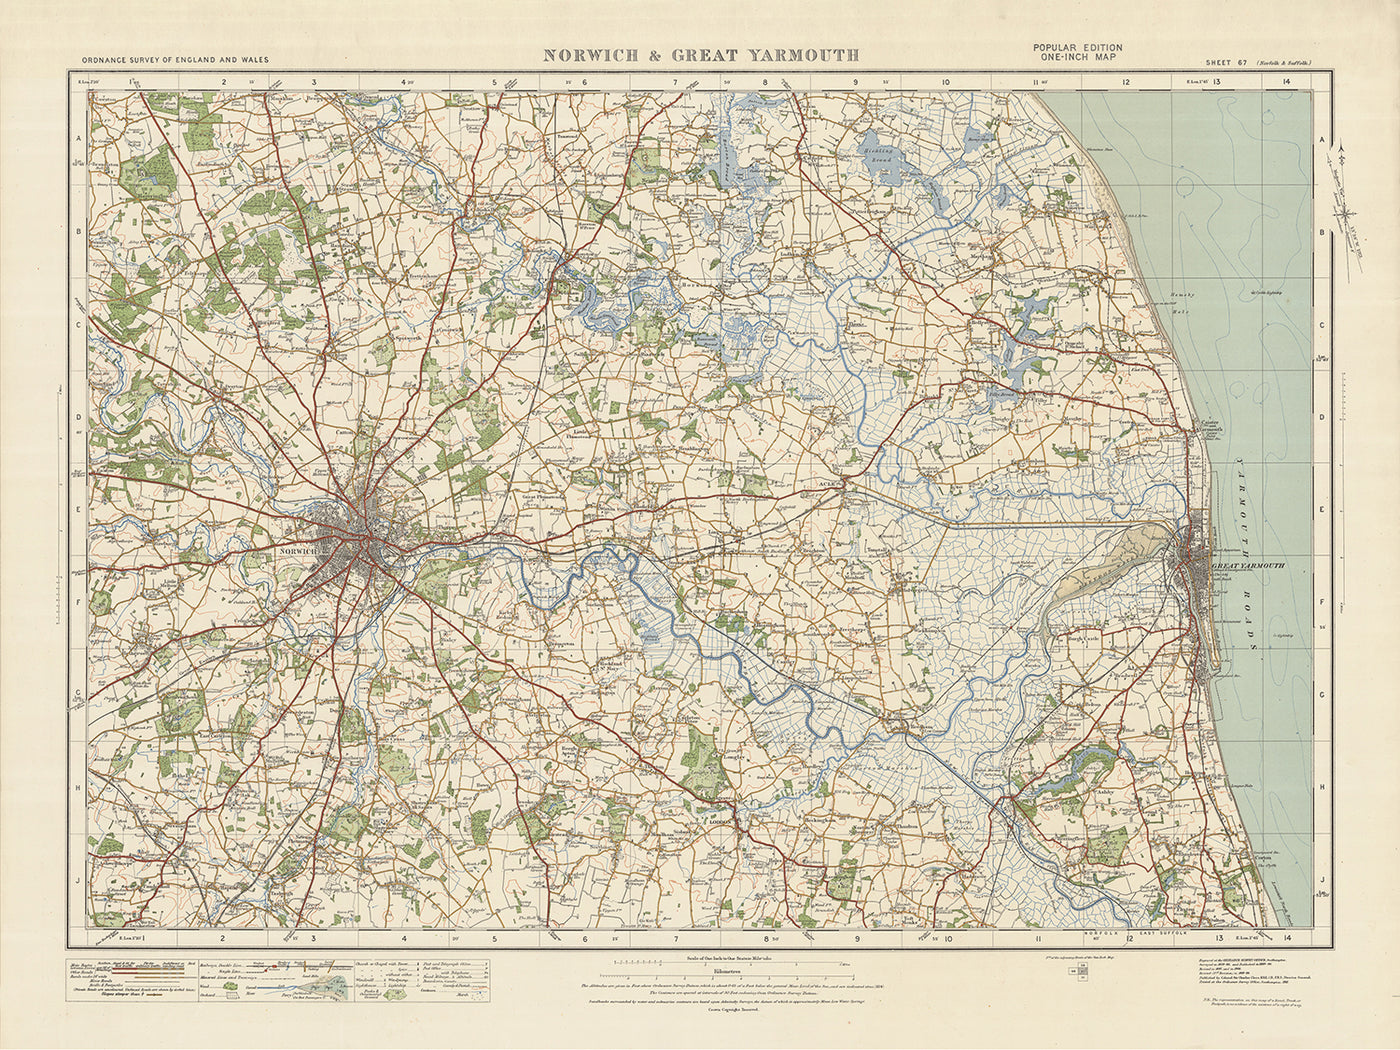 Mapa de Old Ordnance Survey, hoja 67 - Norwich y Great Yarmouth, 1925: Caister-on-Sea, Hethersett, Loddon, Acle, The Broads